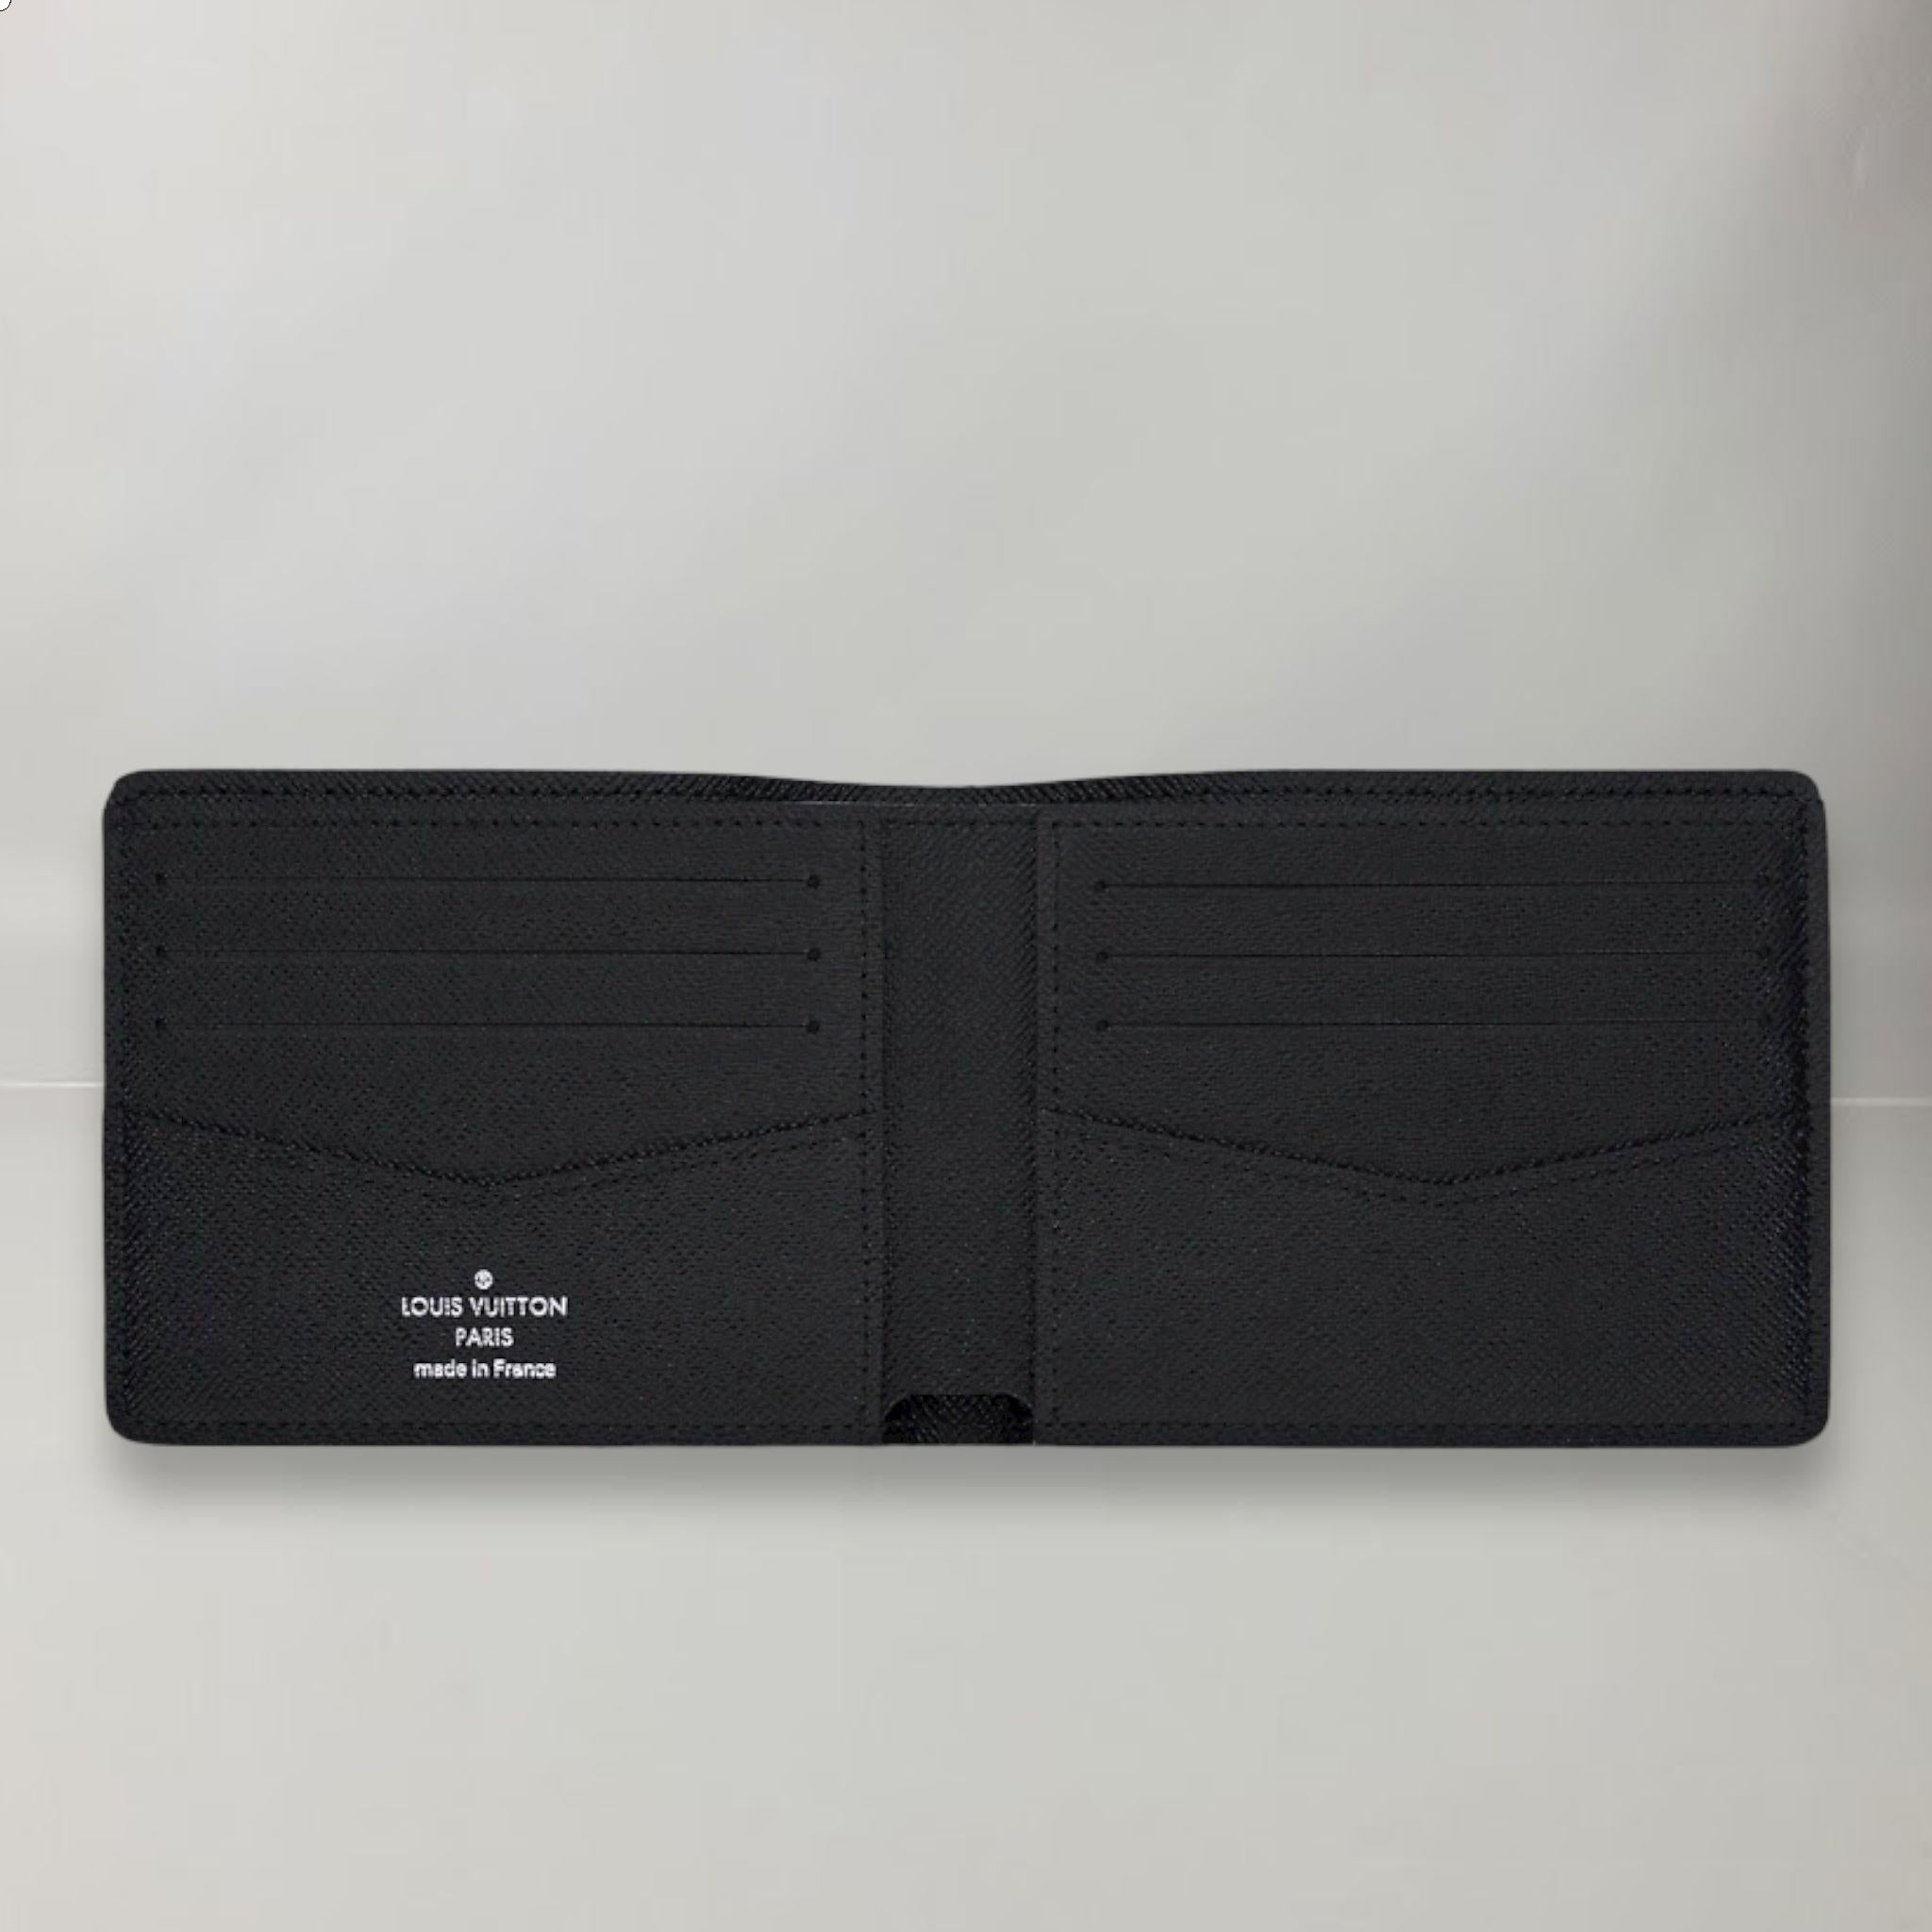 End by name, end by nature. This compact Taïga leather wallet contains all your essentials and slips easily into a pocket.
Taiga Leather
Cross grain leather lining
Eight card slots
A compartment for bills